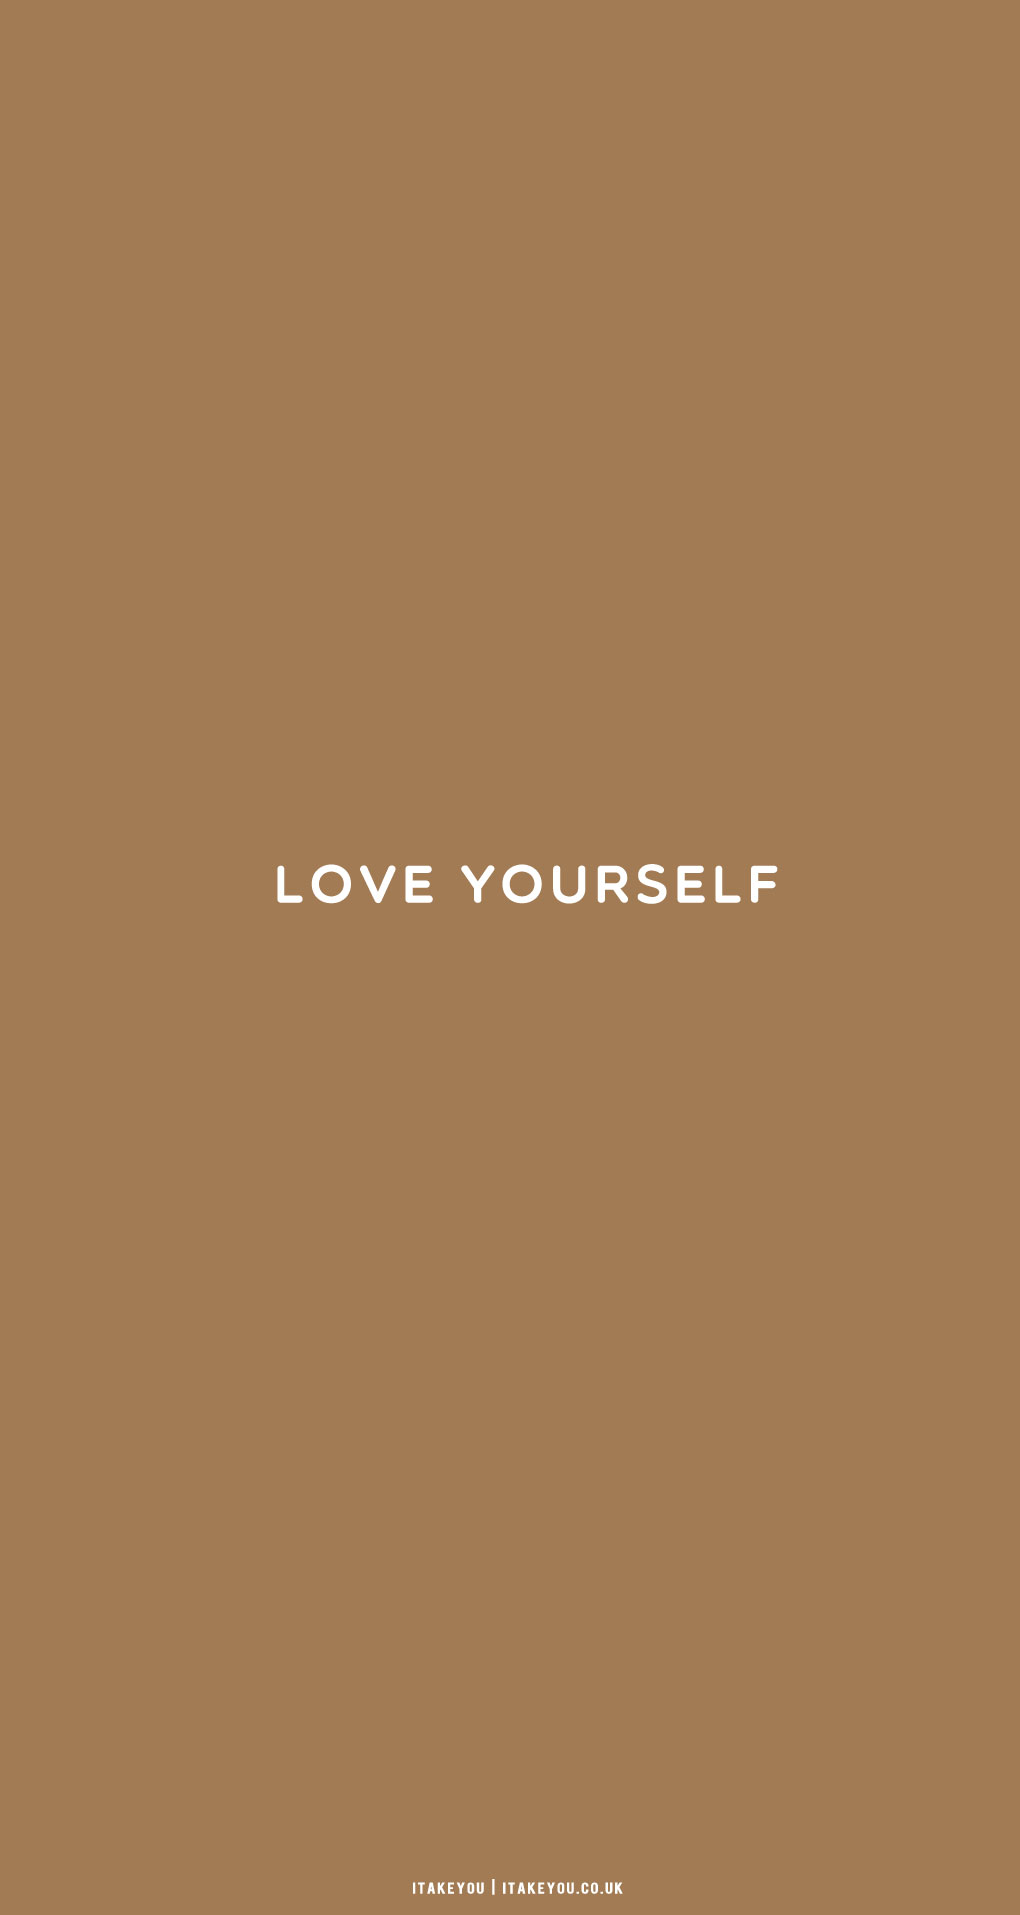 Cute Brown Aesthetic Wallpaper for Phone, Love Yourself I Take You. Wedding Readings. Wedding Ideas